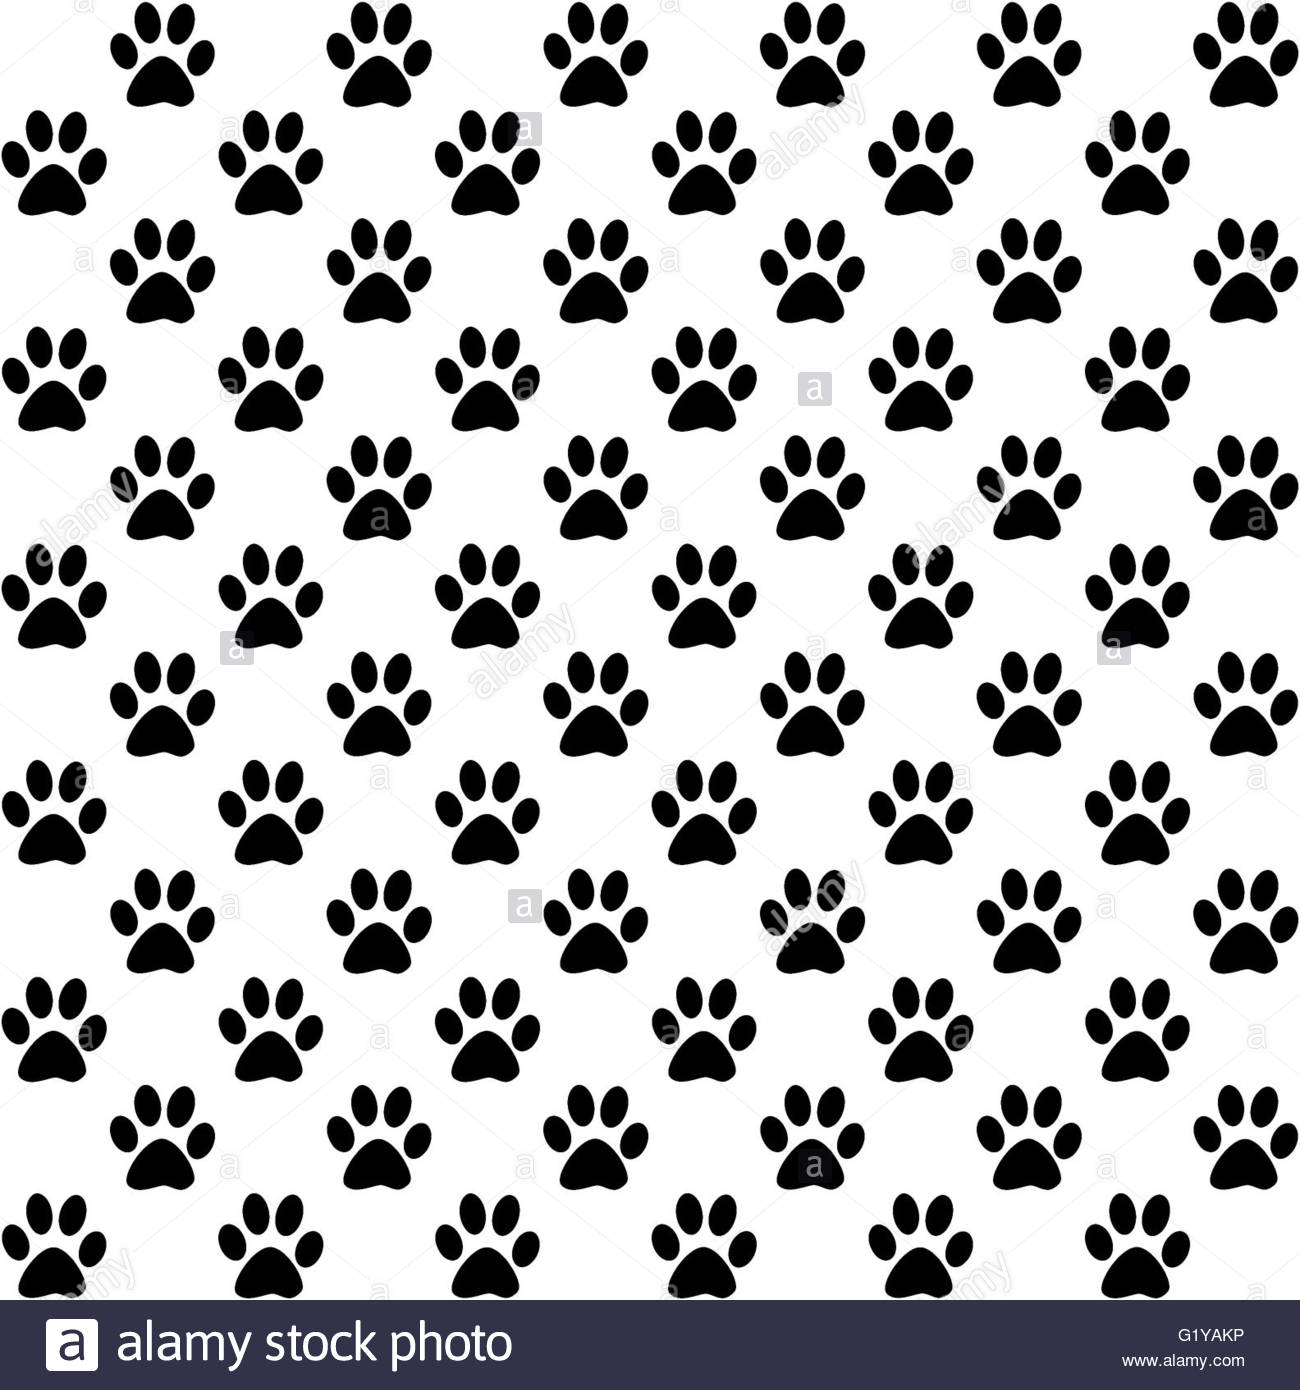 Paw Prints In Black On White Background A Seamless Pattern Stock